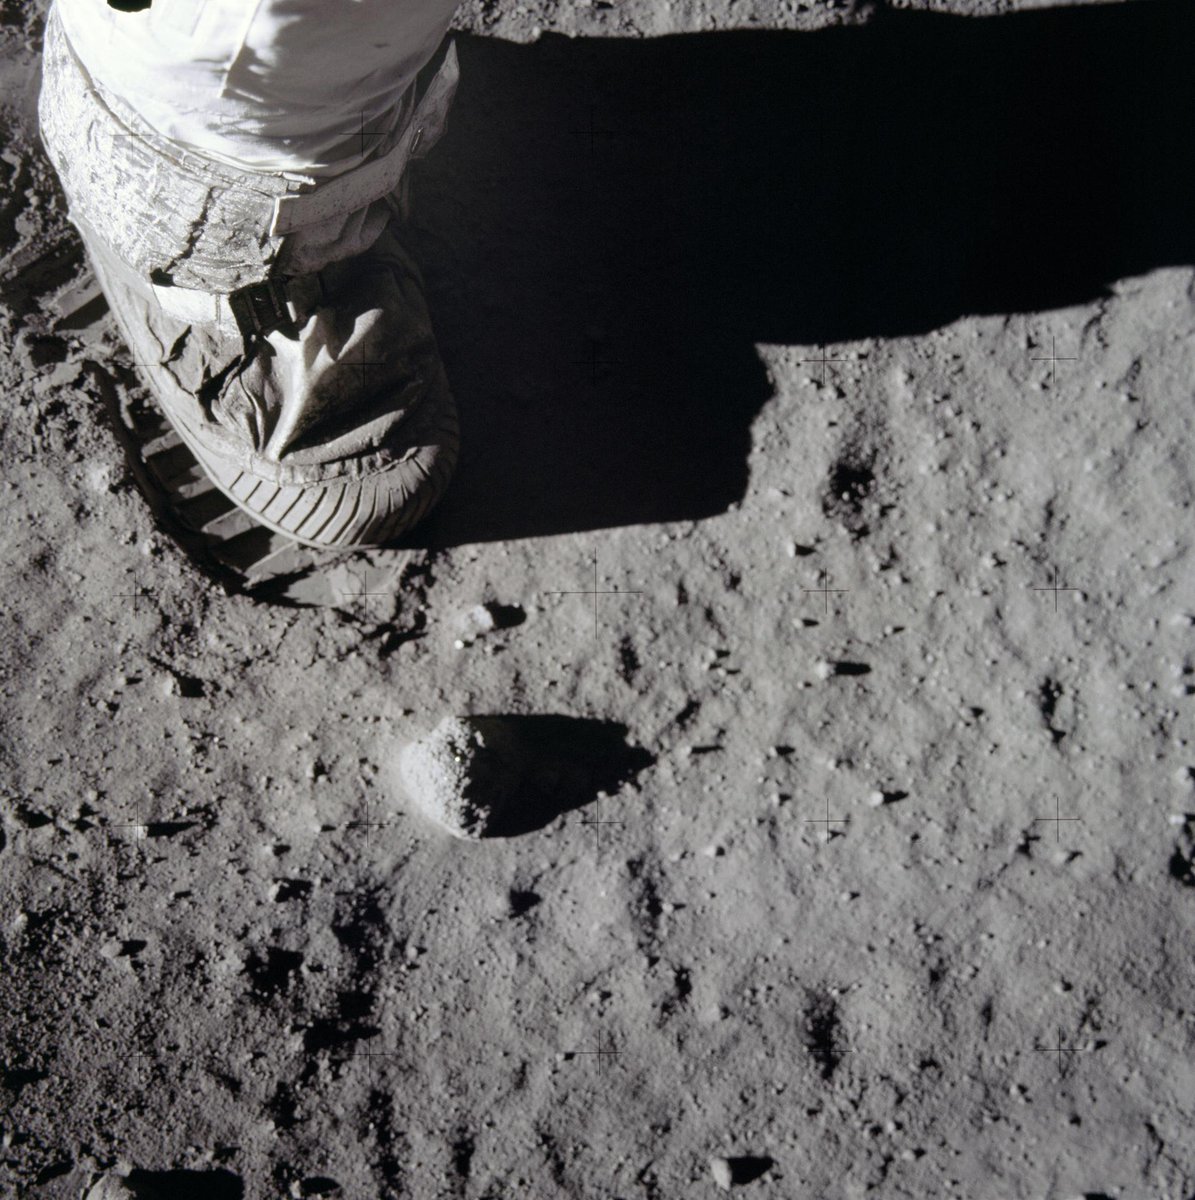 One small step. OTD 54 years ago, Apollo 11 crewmembers became the first human beings to set foot on the lunar surface. Today, we’re building on the legacy of Apollo as we prepare to establish a long-term human infrastructure on the Moon with #Artemis. #InternationalMoonDay